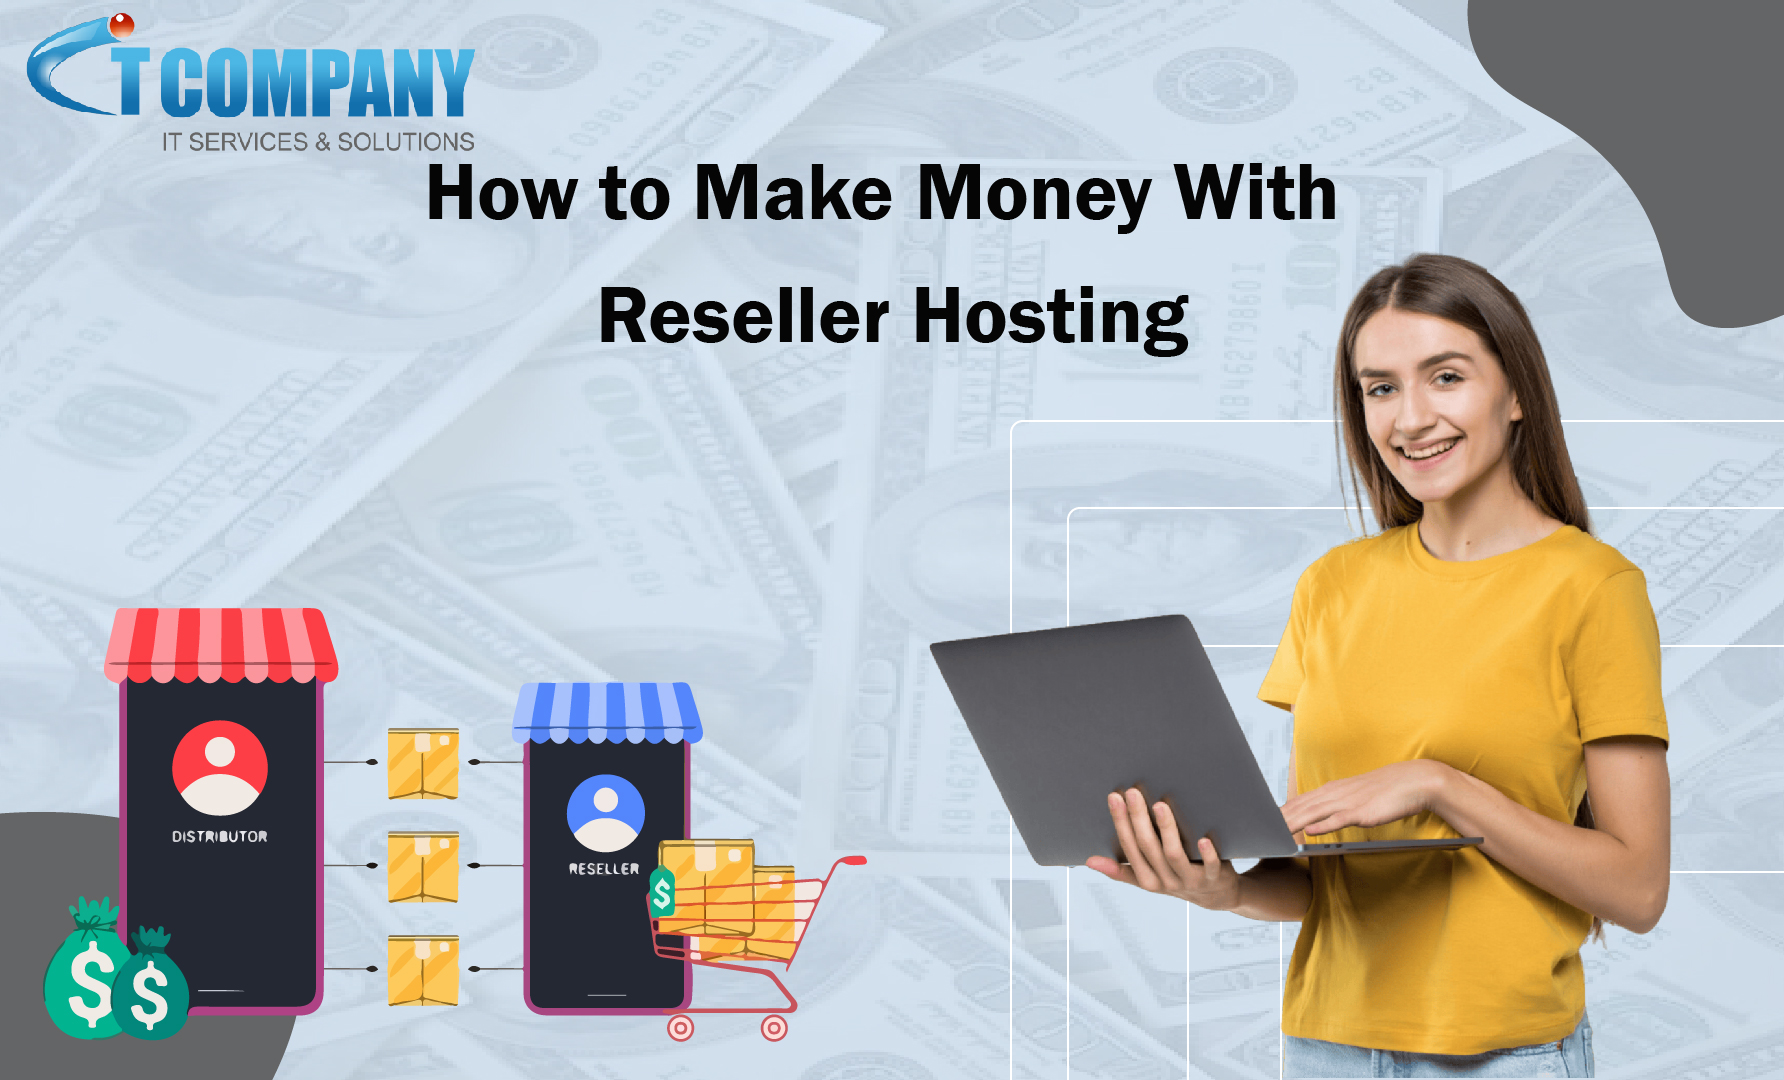 How to Make Money With Reseller Hosting: The Easy Ways